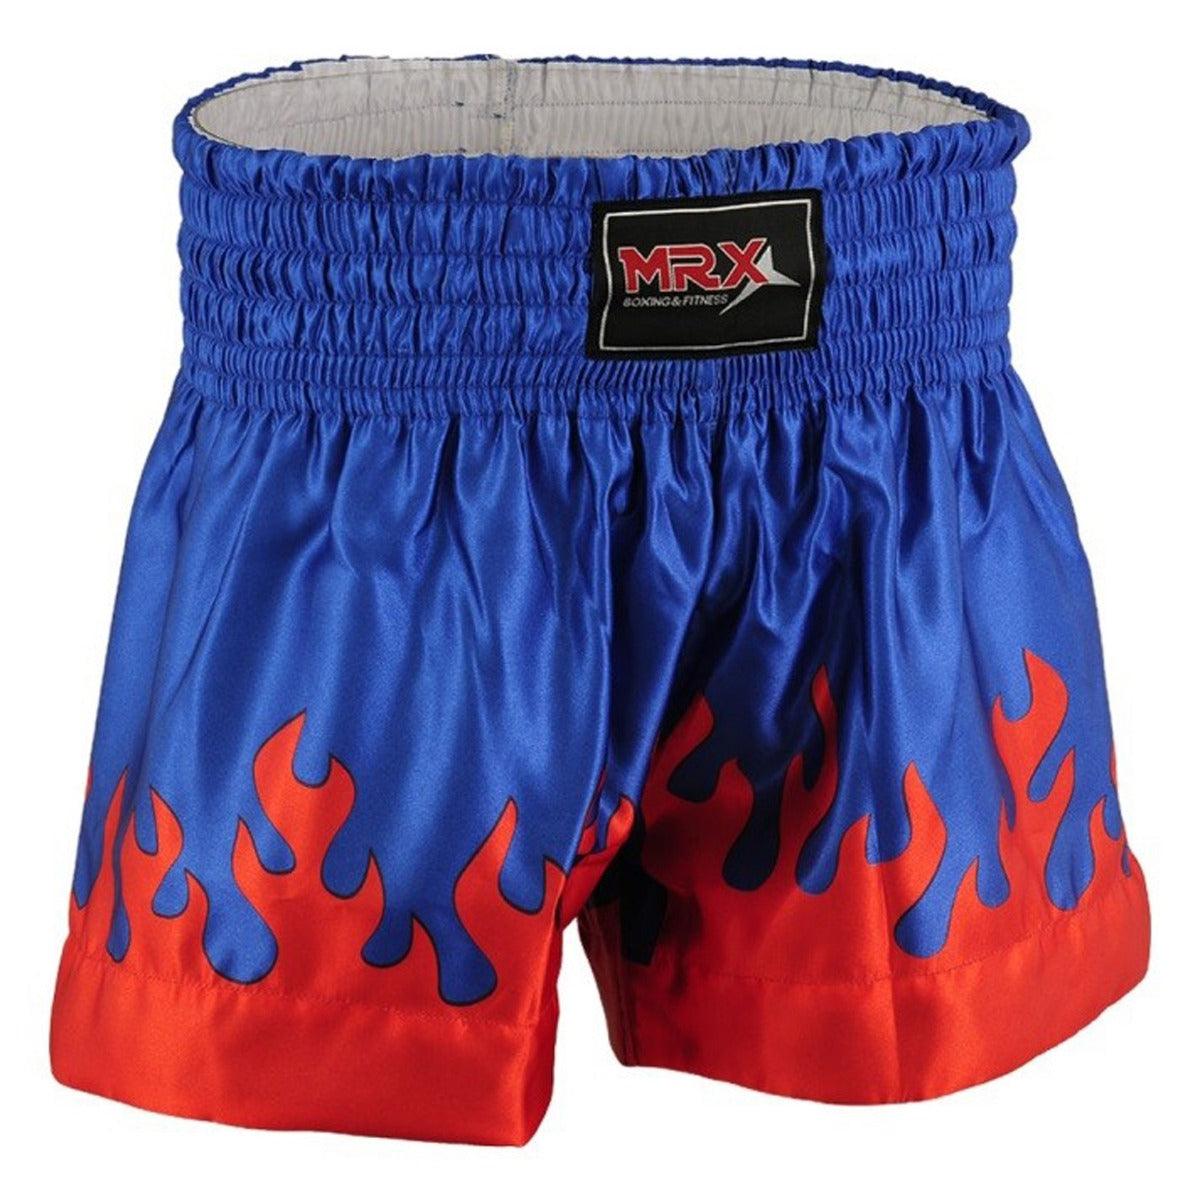 MRX Mens Boxing Shorts Fighting Shorts Blue Red Flame -1303